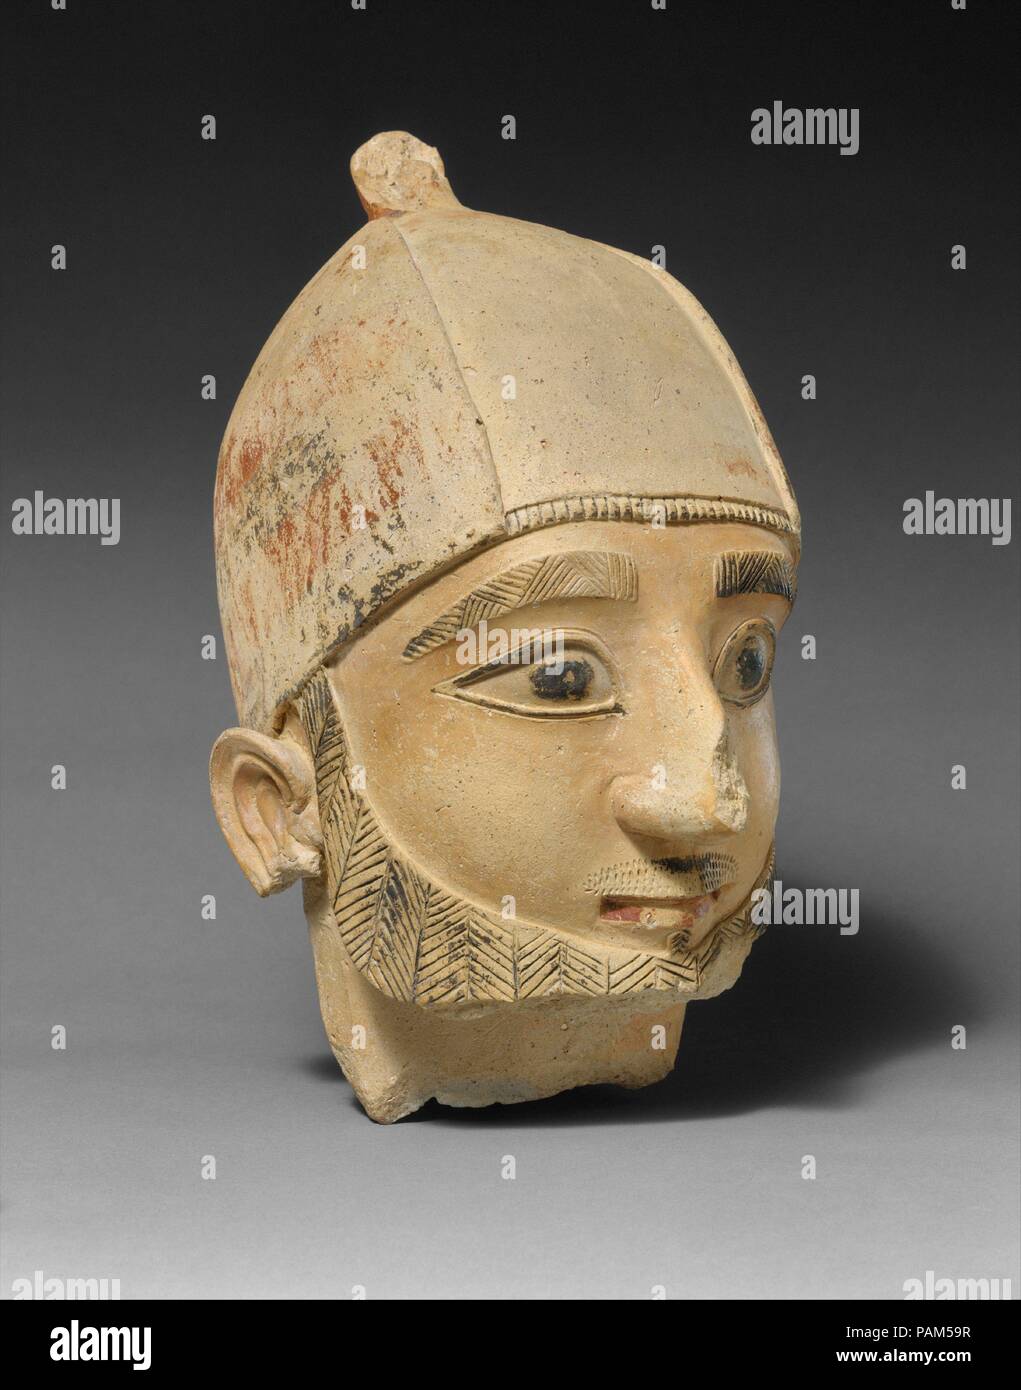 Terracotta head of a man. Culture: Cypriot. Dimensions: H. 11 1/2 in. (29.2 cm). Date: ca. 600 B.C..  The Cesnola Collection is fortunate to have two fine early heads that belonged to full-length figures. Large-scale terracotta sculpture began to be made on Cyprus during the mid-seventh century B.C. Molds were used for the heads, while the bodies were handmade. This bearded head wears the helmetlike headgear that appears on the nearby limestone sculptures. Details are articulated with considerable care, and remaining pigment suggests the liveliness of the figures' original appearance. Museum:  Stock Photo